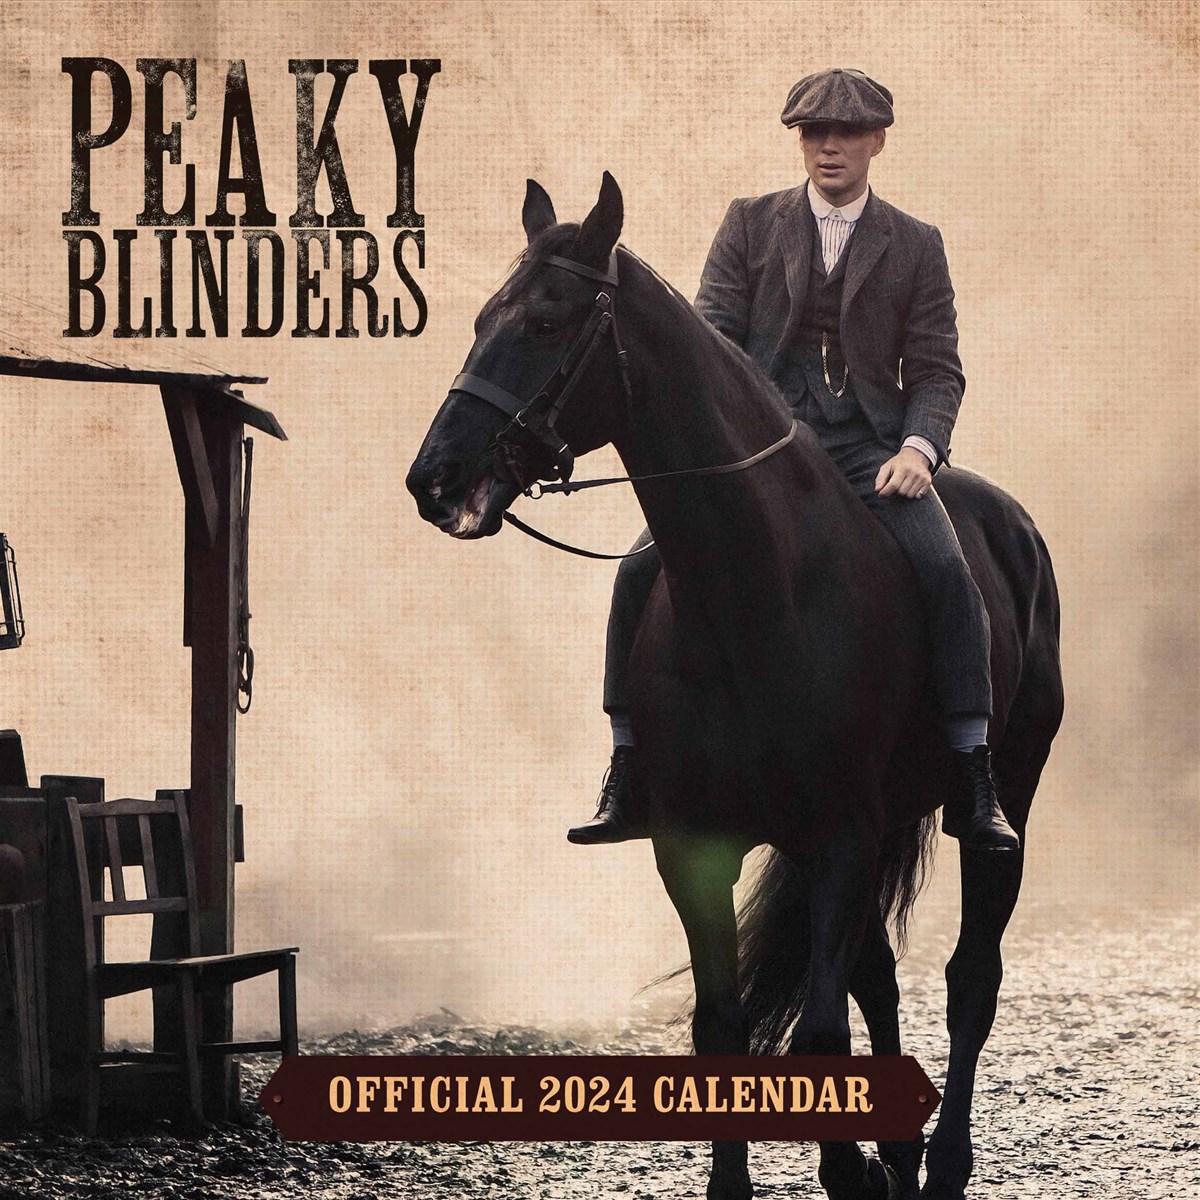 Best Peaky Blinders tours and experiences to do in 2024